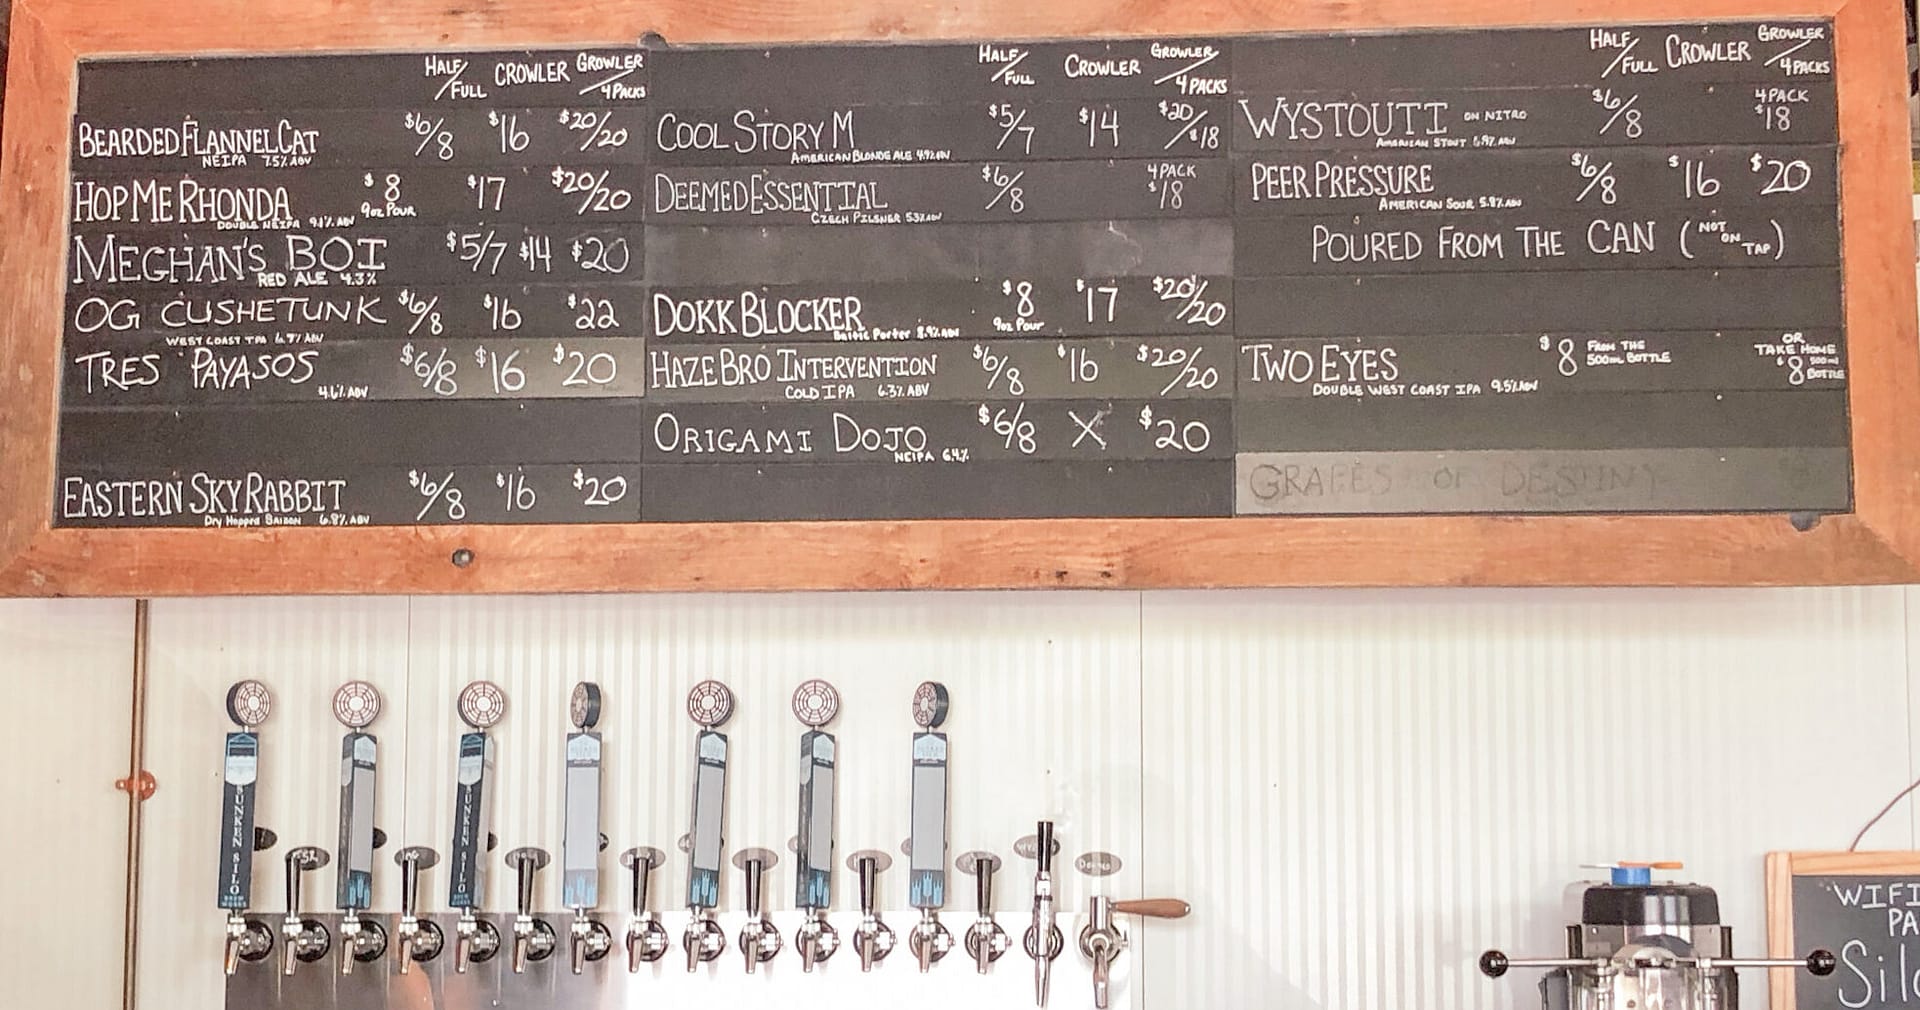 Row of tap handles with a chalk board beer menu hanging above it.